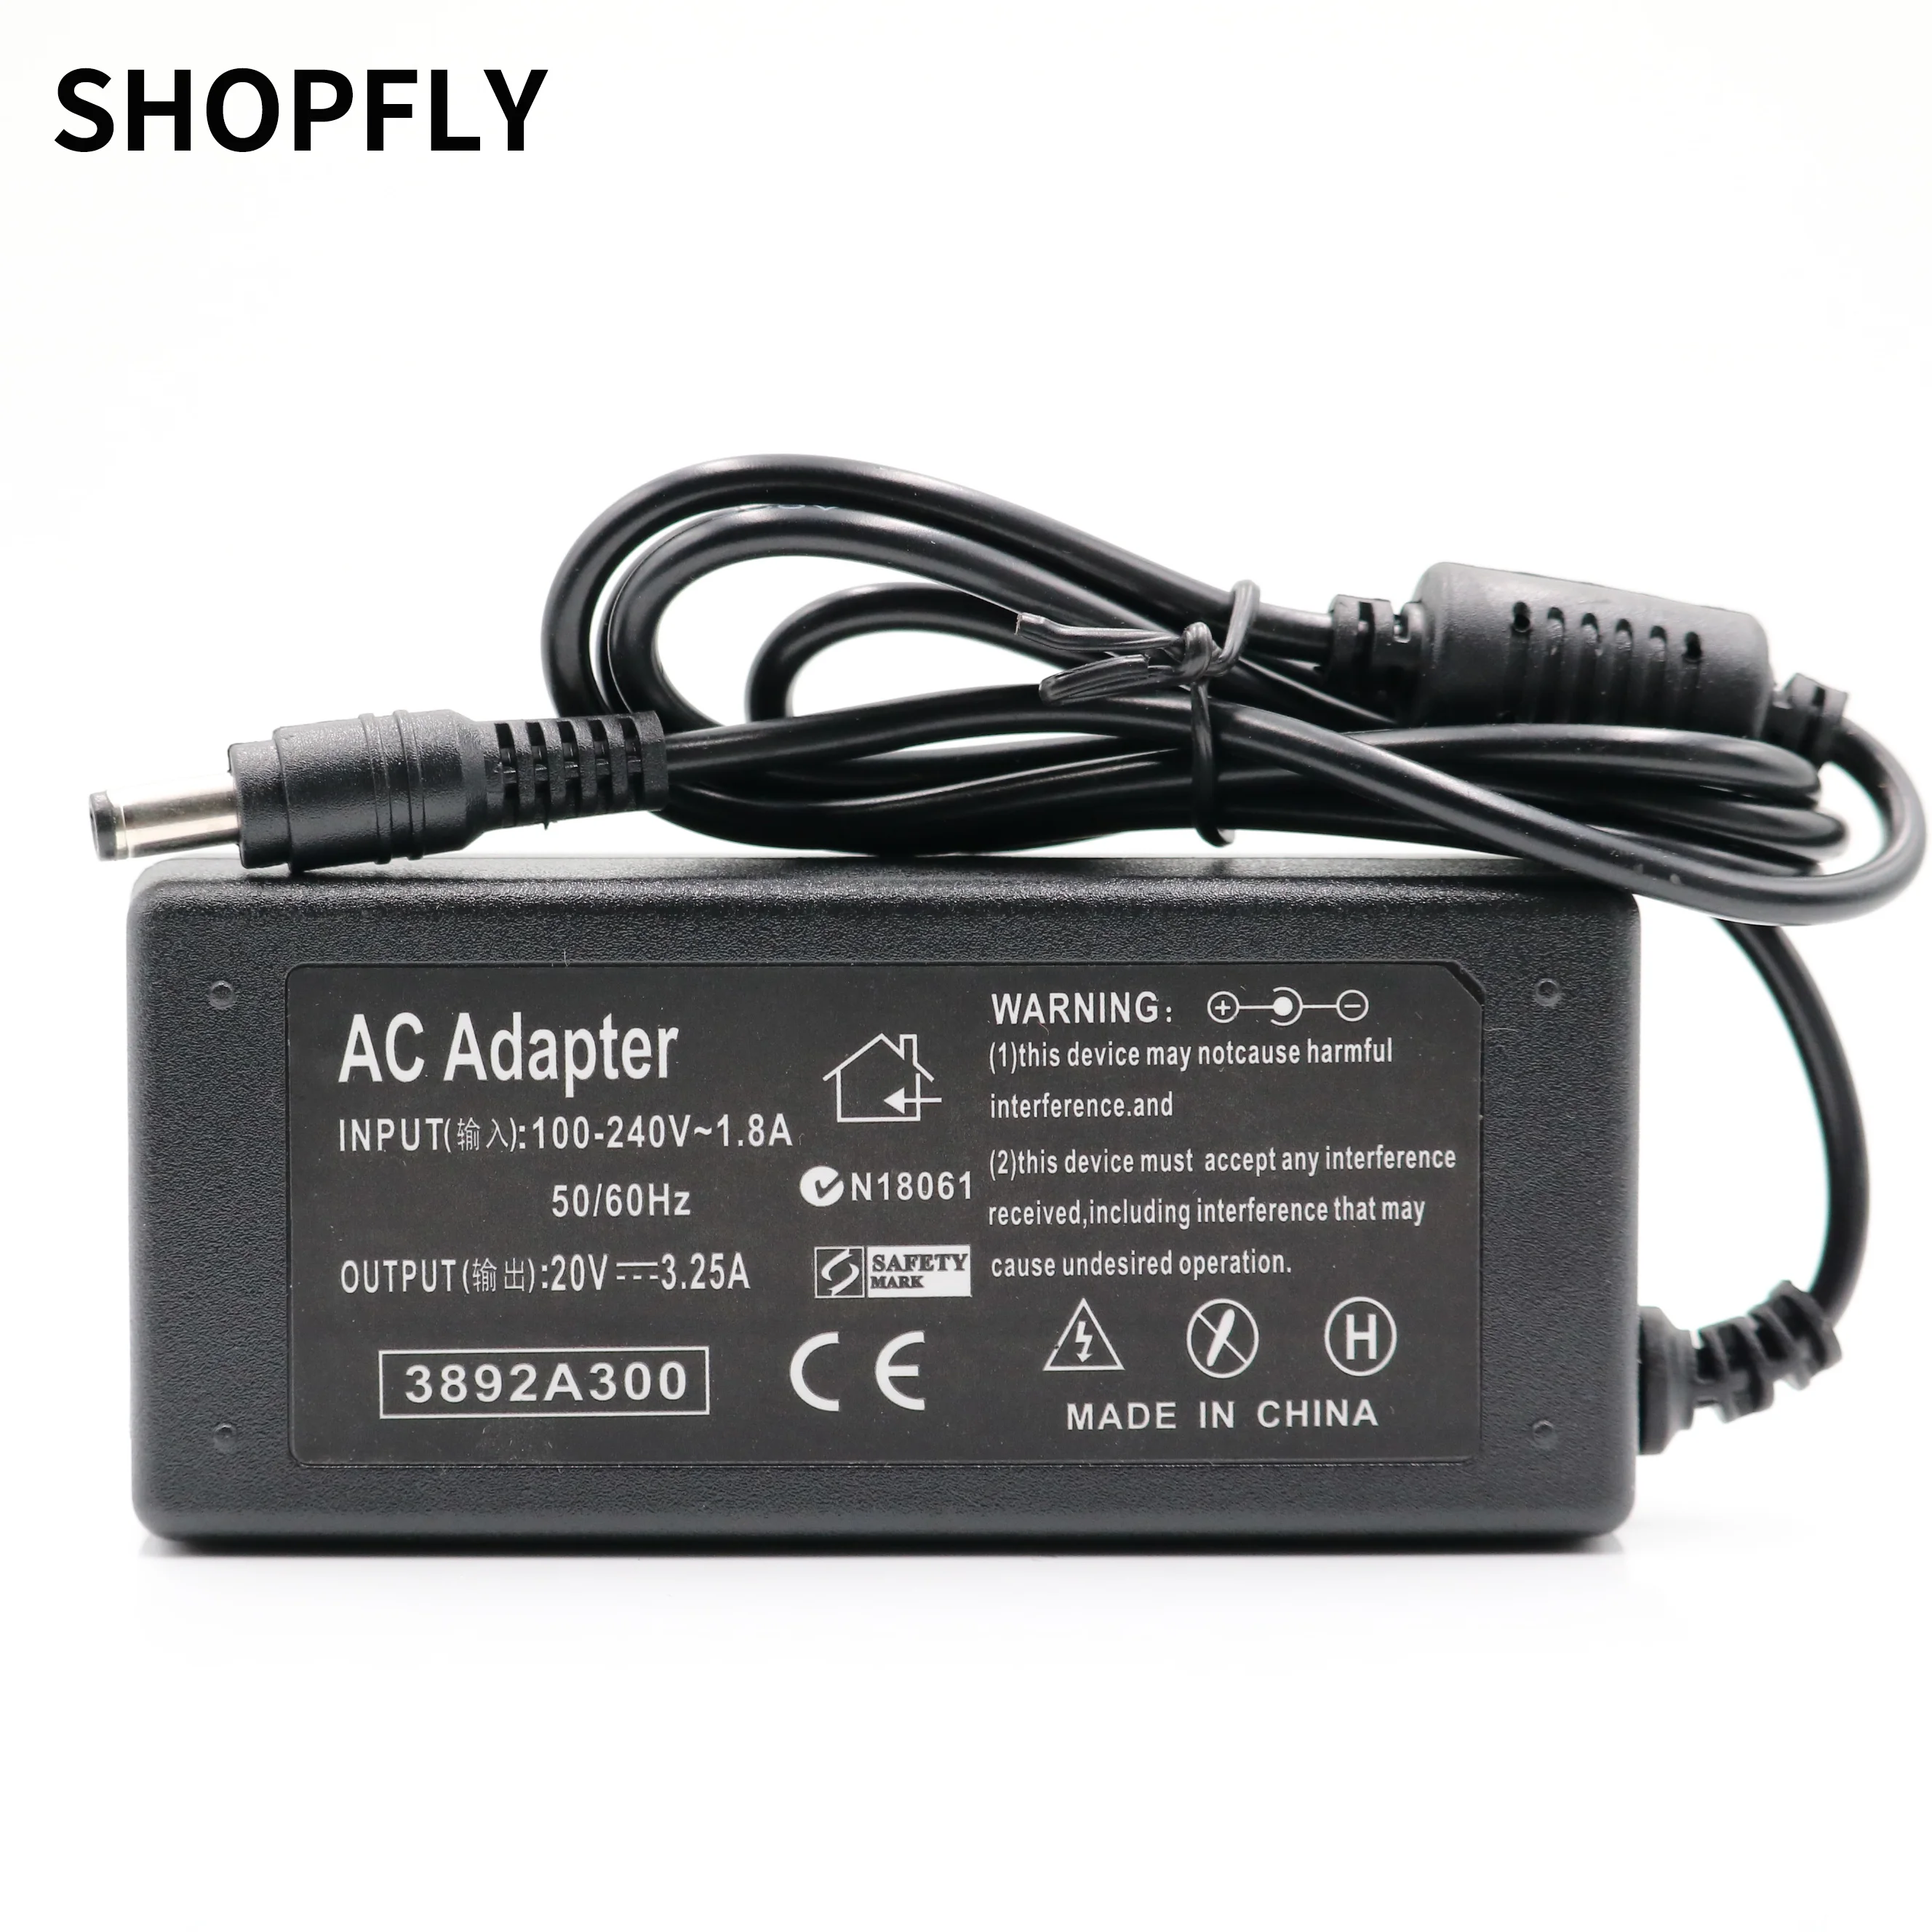 

AC Adapter Laptop Charger 20V 3.25A 5.5*2.5mm For Lenovo IBM B470 B570e B570 G570 G470 Z500 G770 V570 Z400 P500 P500 Series